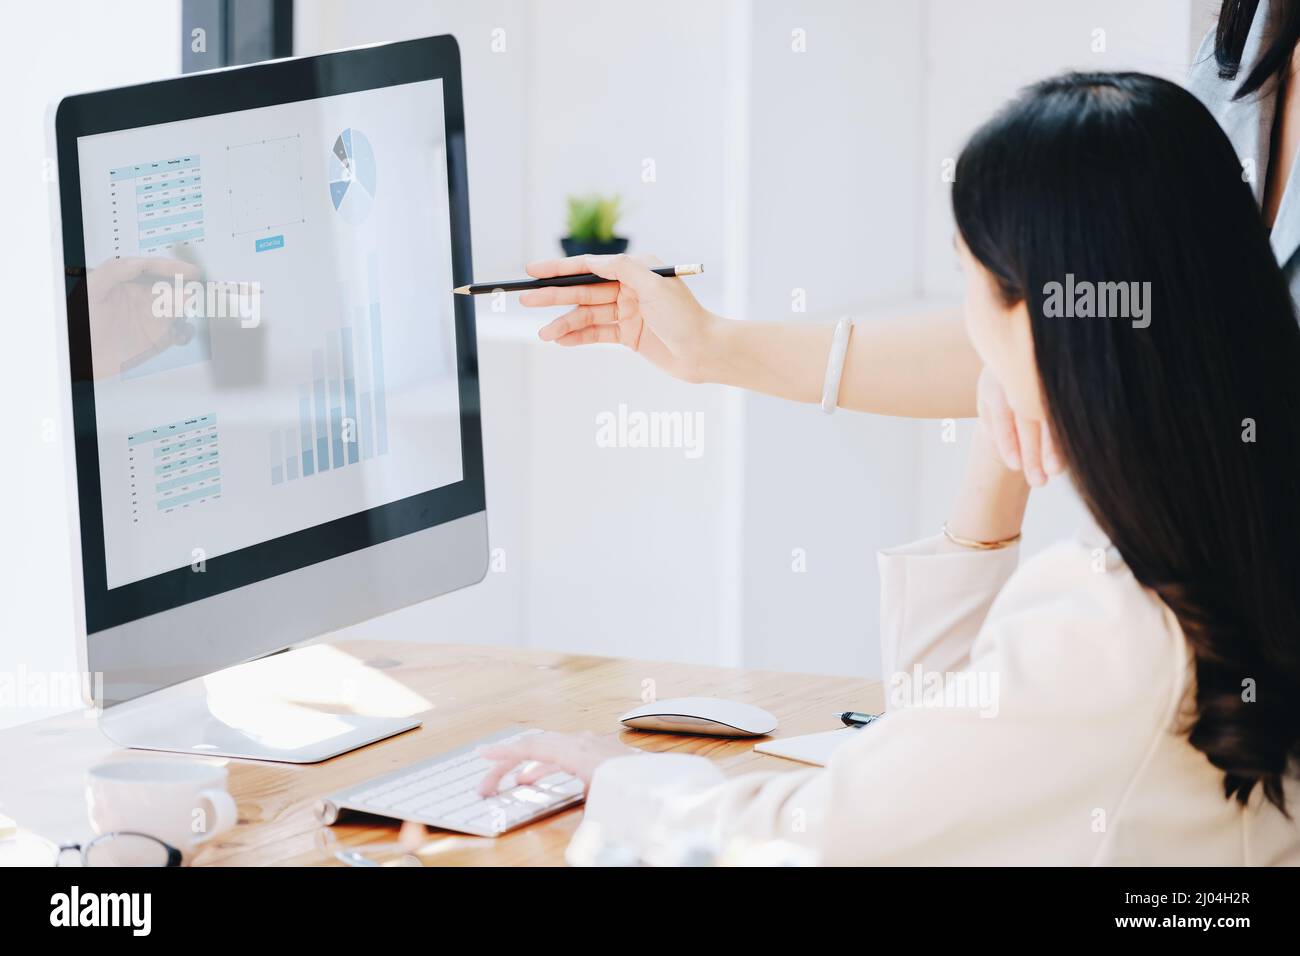 Consultation, Discussion, Marketing and Investment concept, female employee with pen is pointing at computer monitor to colleagues to draw conclusions Stock Photo